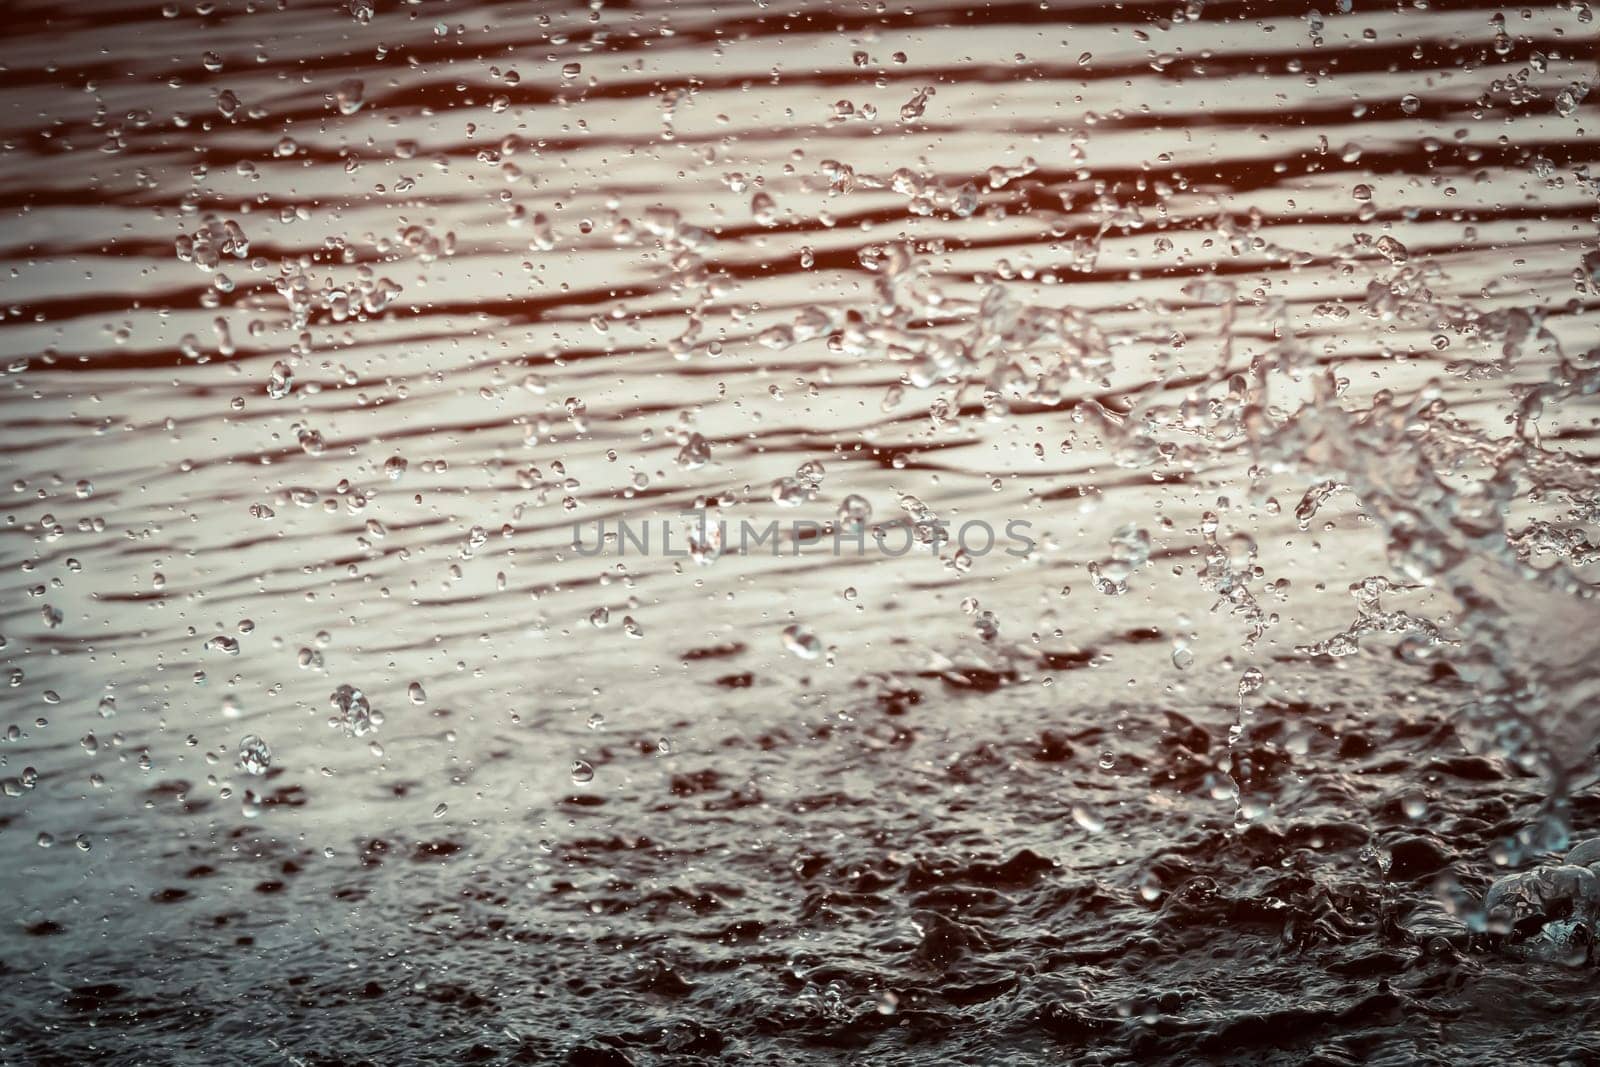 Beautiful background with splashes, drops of water in the river or ocean during the rain close up with nobody, wild nature water texture.